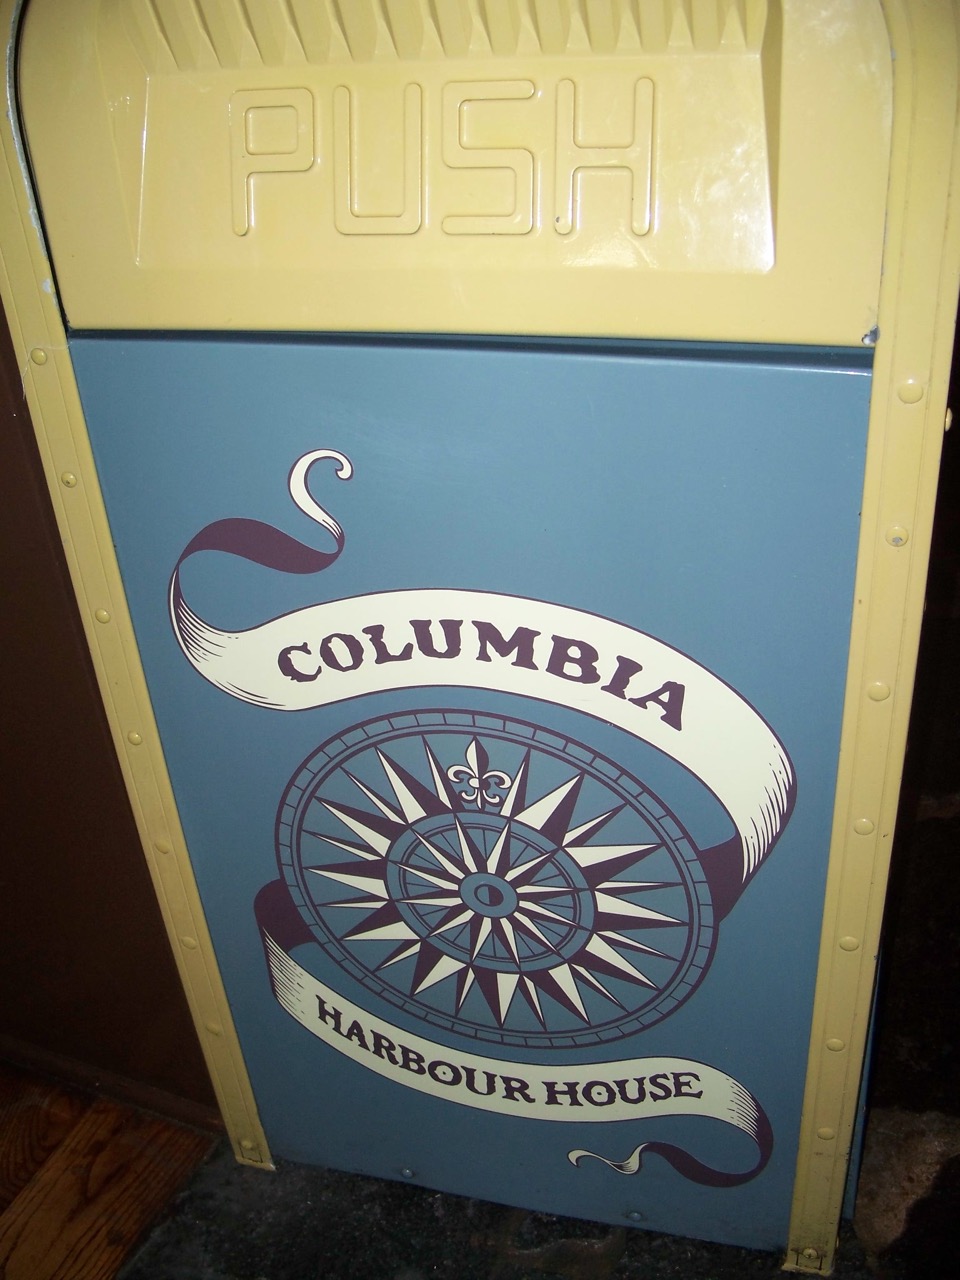 One of the most detailed trash receptacles at Magic Kingdom, the receptacle at the Columbia restaurant. Photo by J. Jeff Kober.